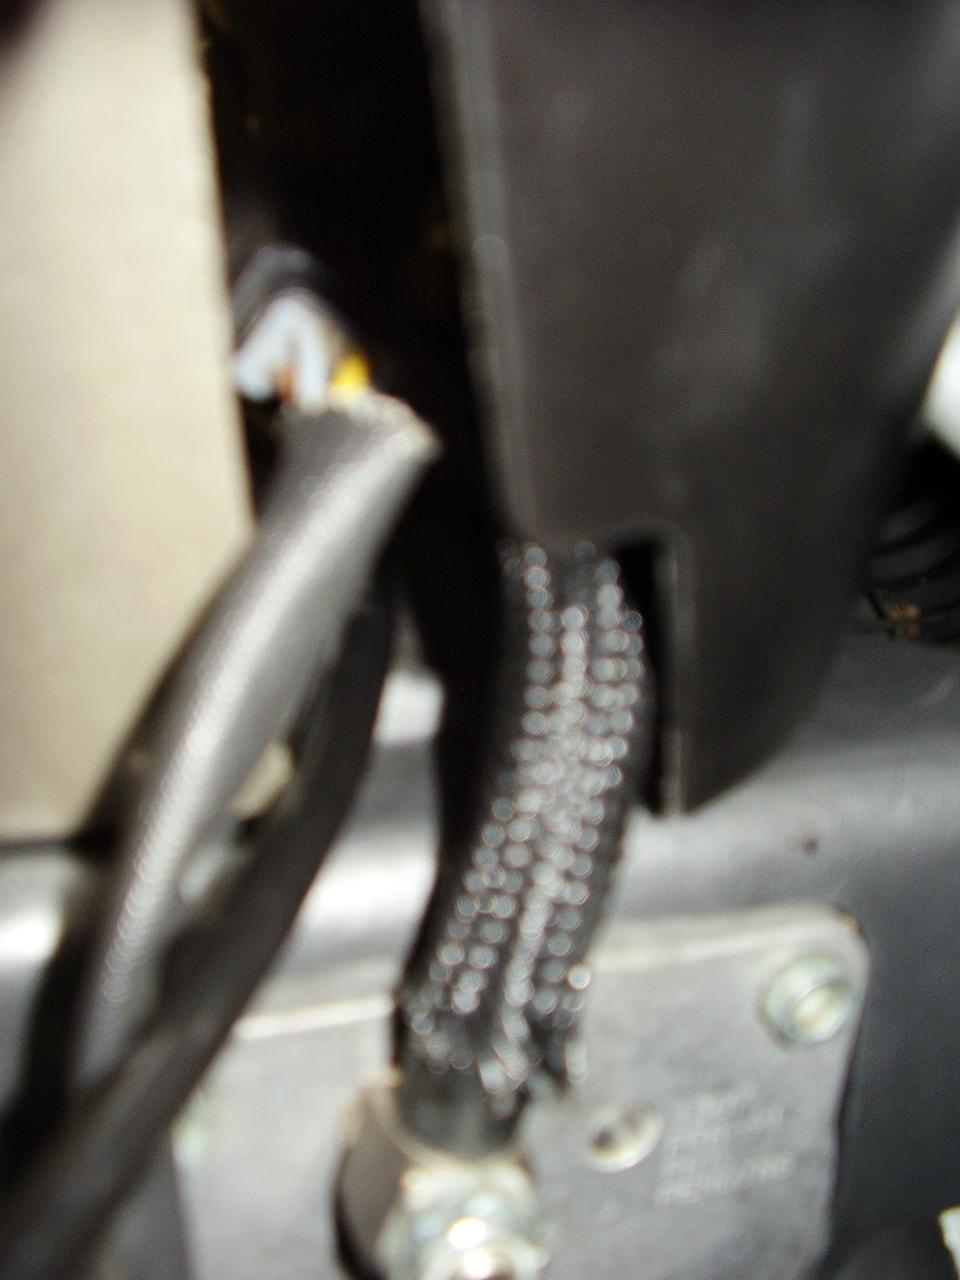 Air Duct / Fuel line